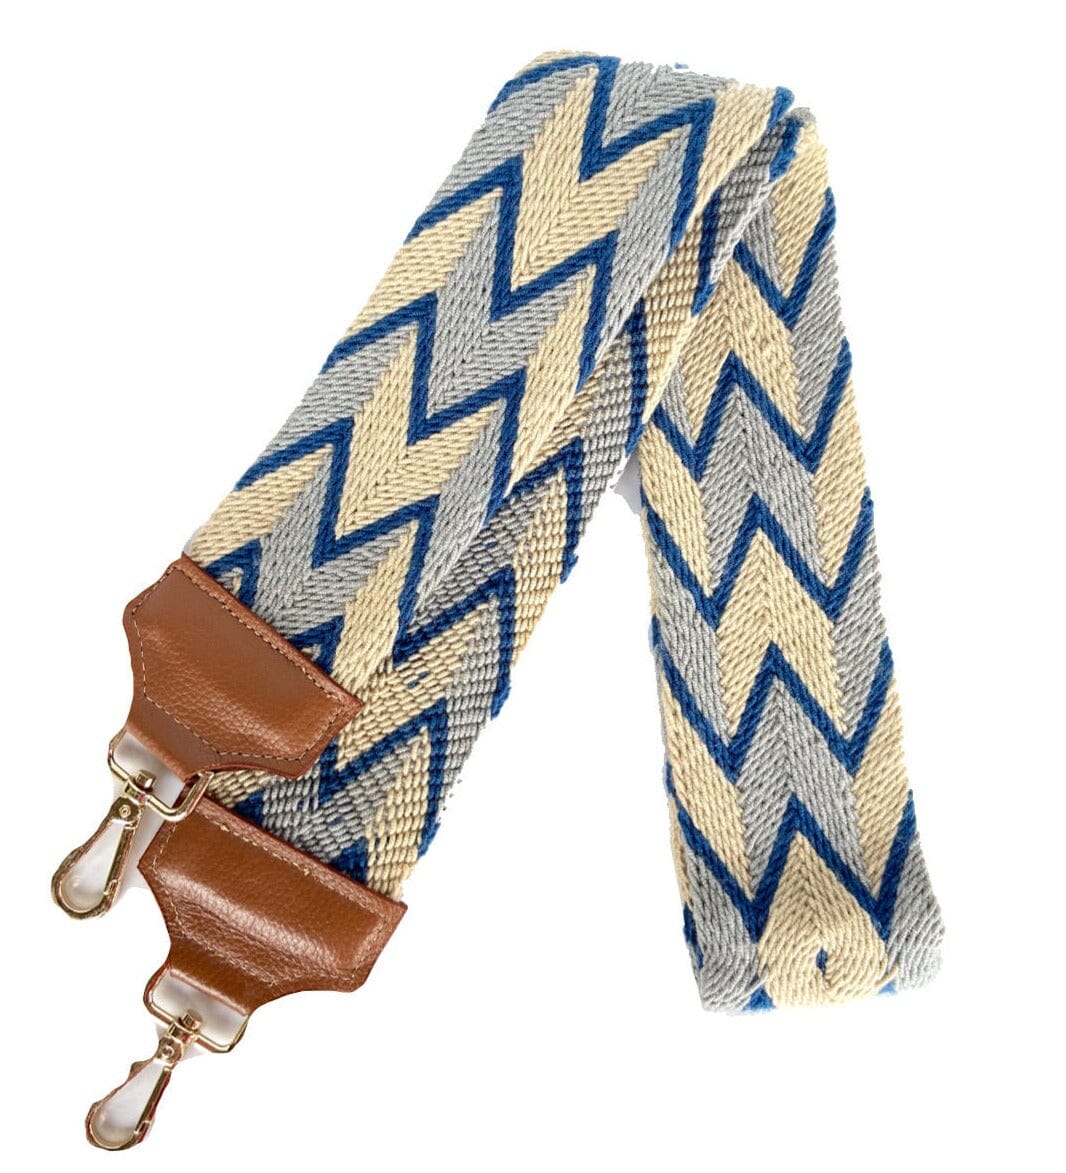 Neutral Tones / Brown Leather Bag Strap | Camera Strap | Strap Replacement | Woven Strap | Colorful 4U